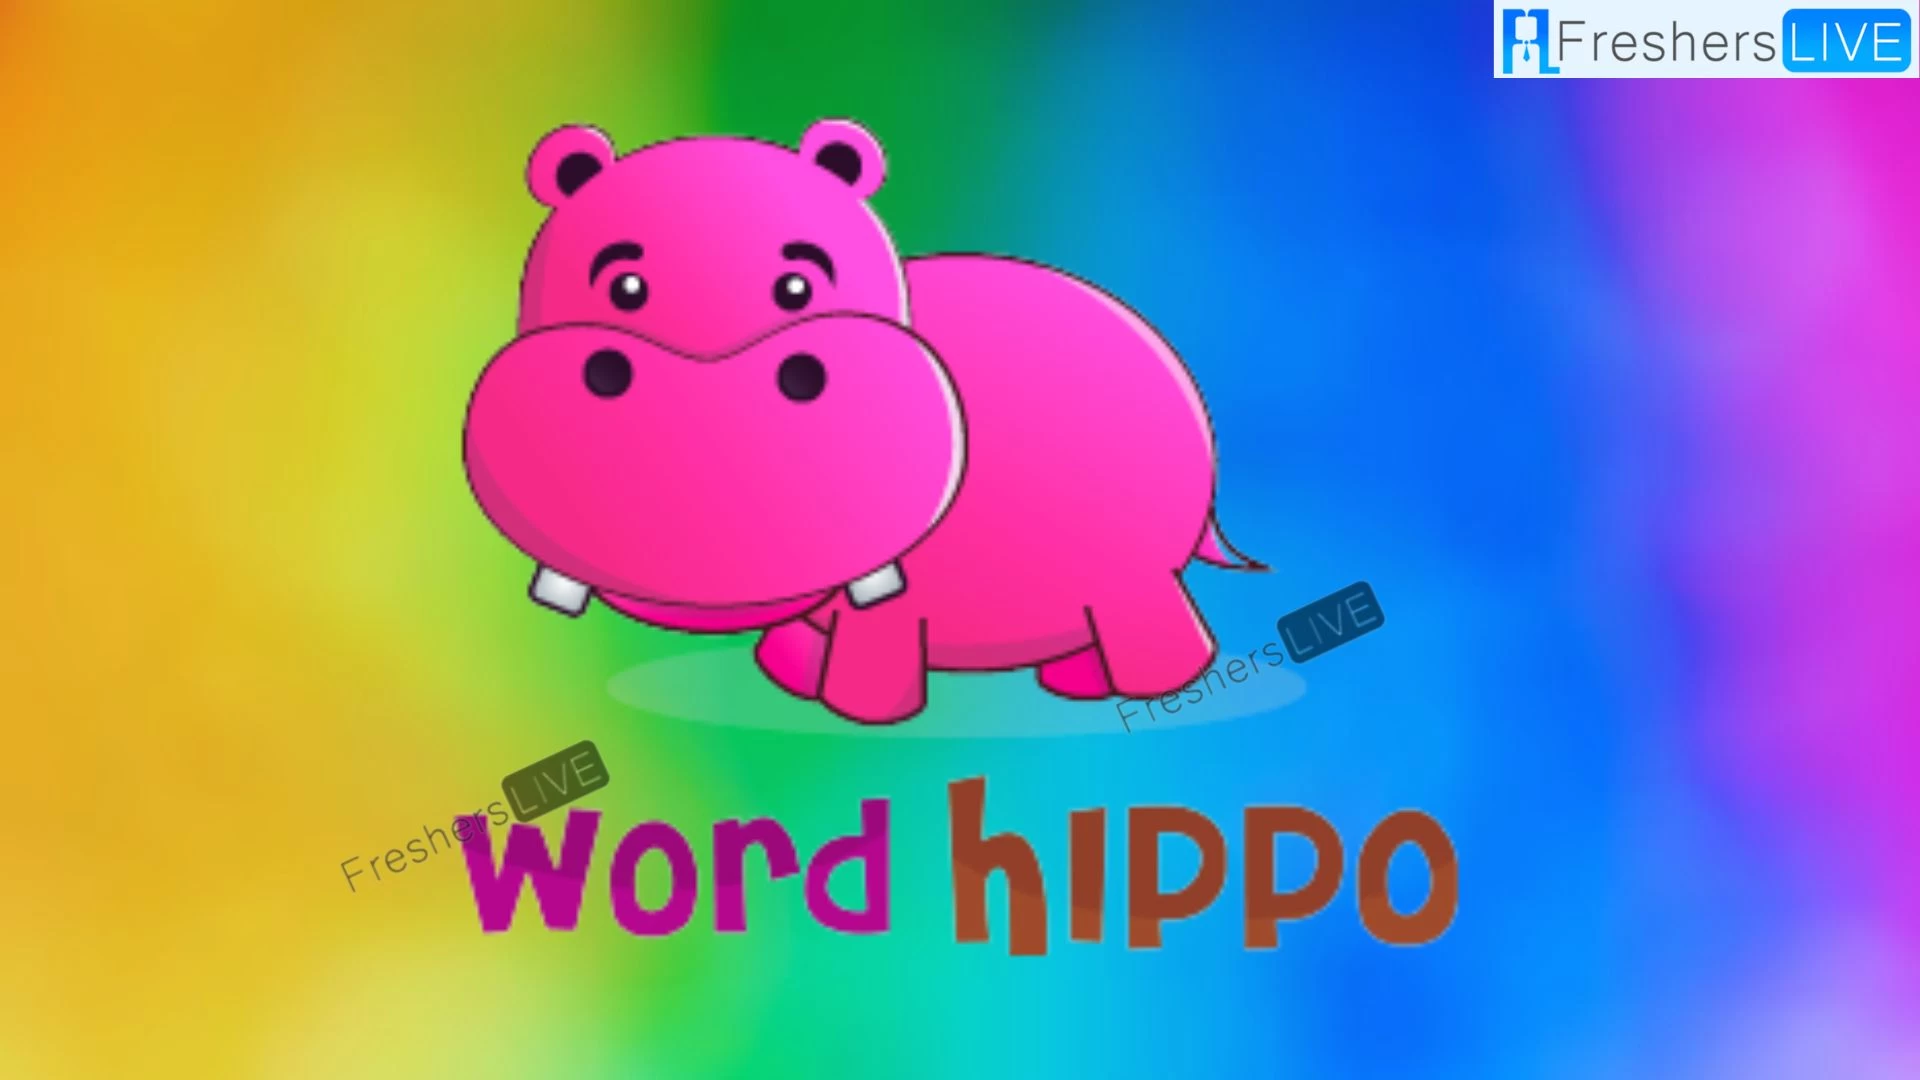 Wordhippo 5 Letter Words: Everything You Need to Know!